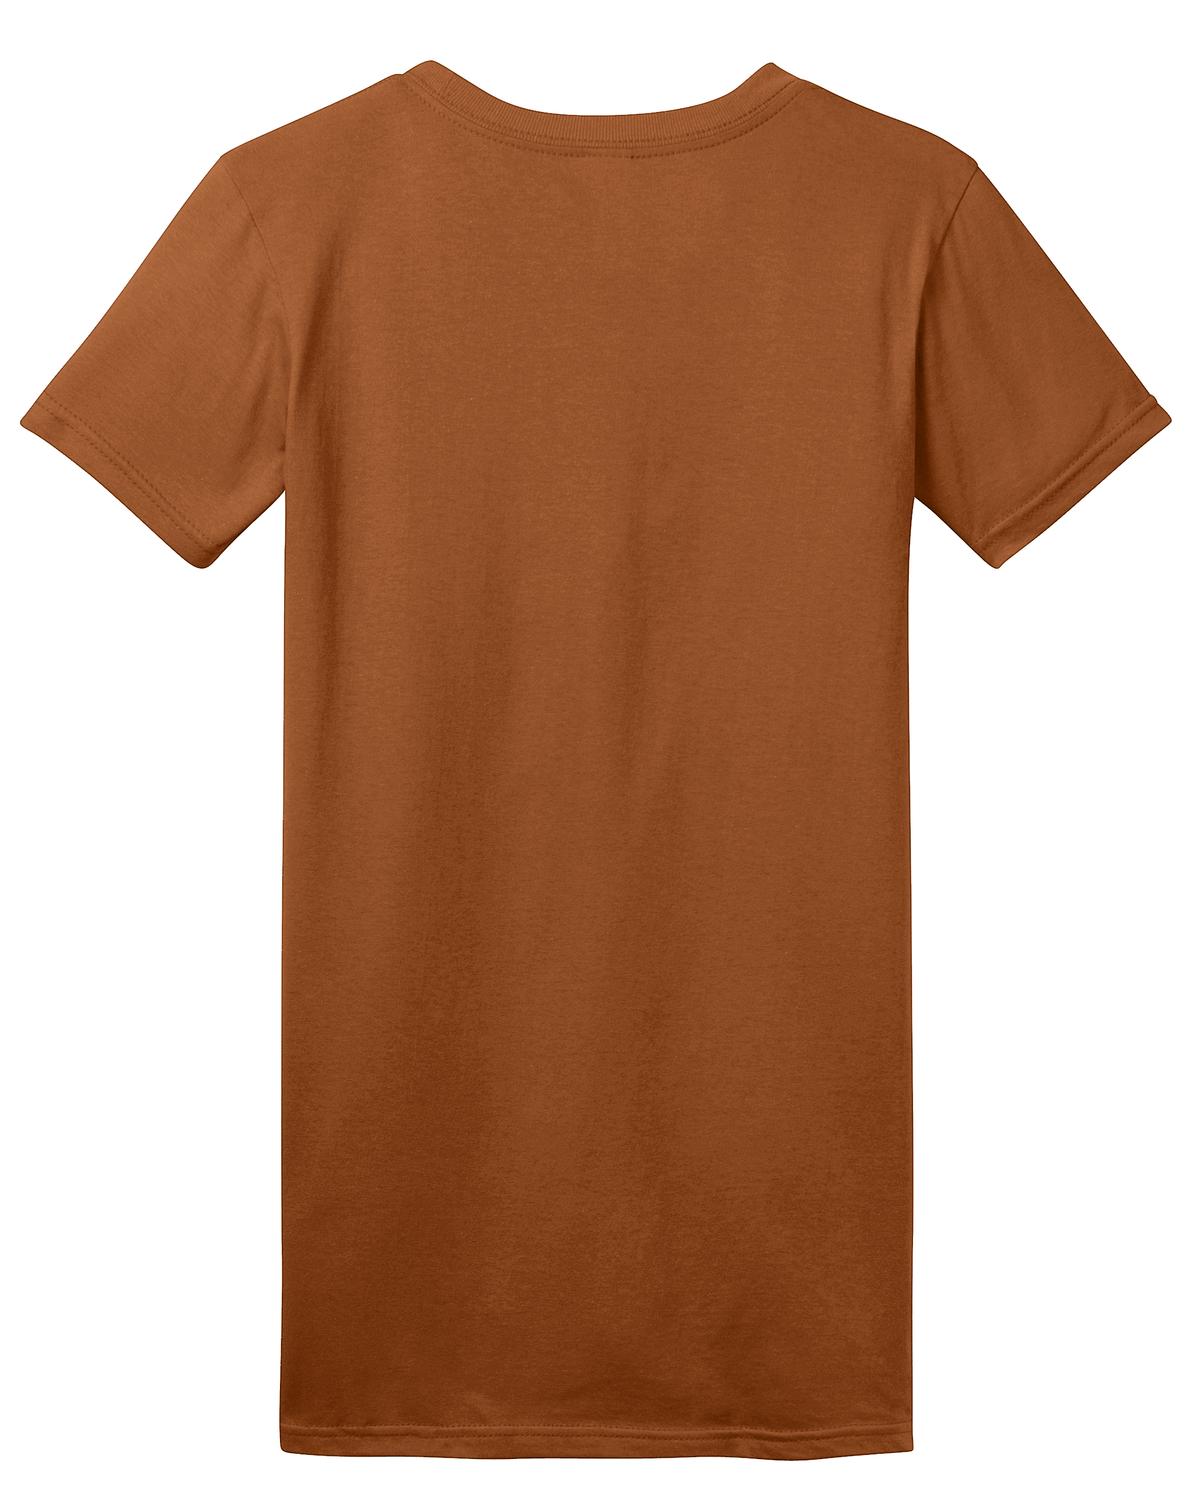 District Women's Fitted The Concert Tee DT5001 - Burnt Orange